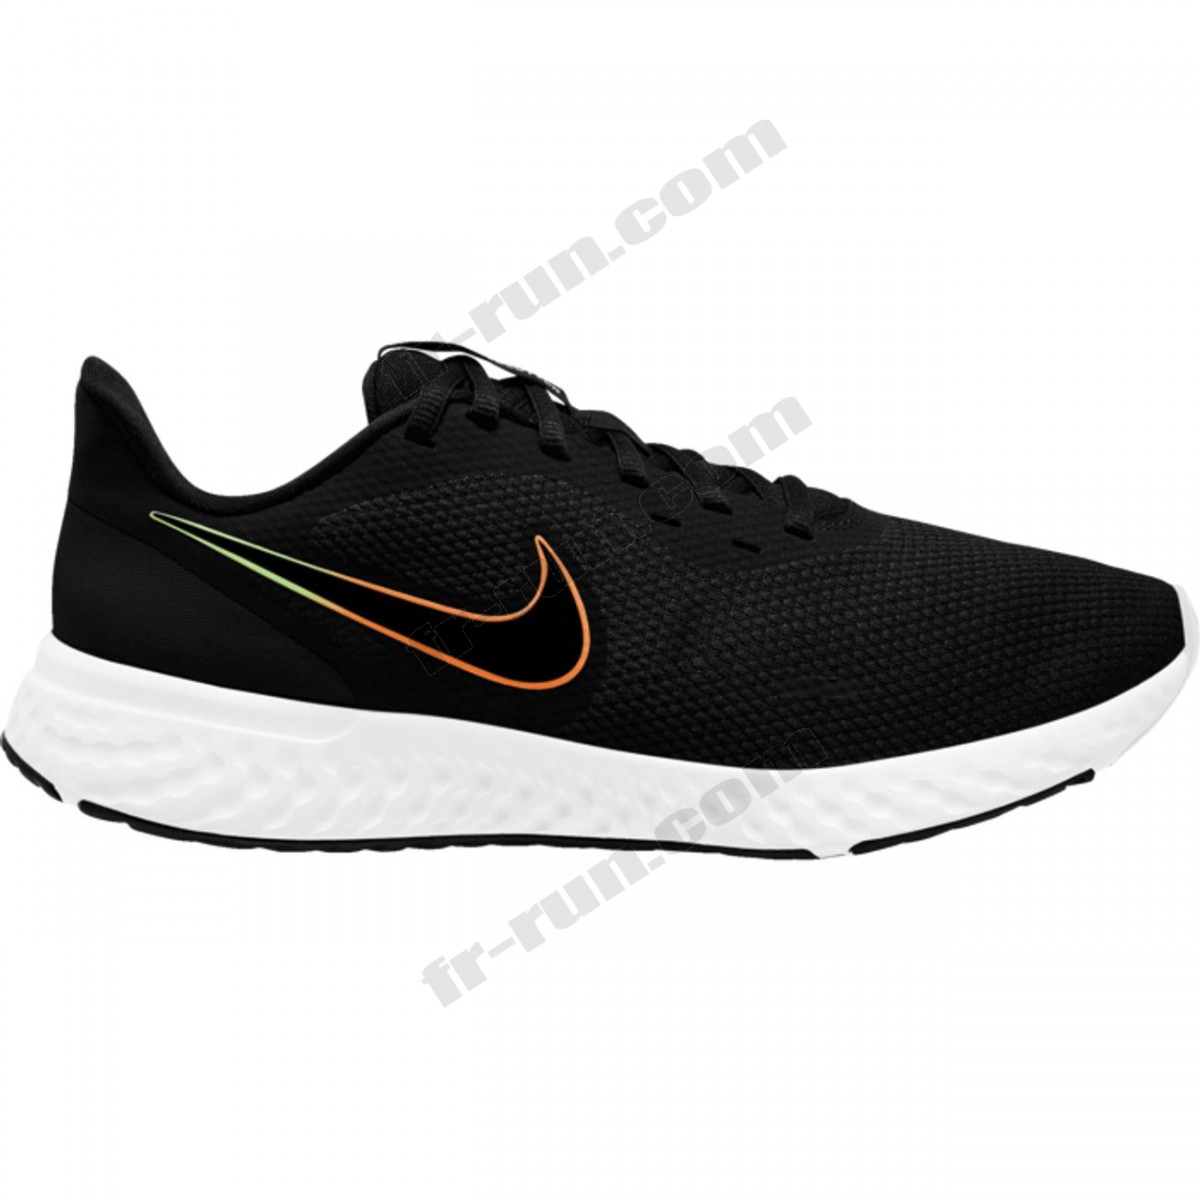 Nike/CHAUSSURES BASSES running homme NIKE NIKE REVOLUTION 5 √ Nouveau style √ Soldes - -0